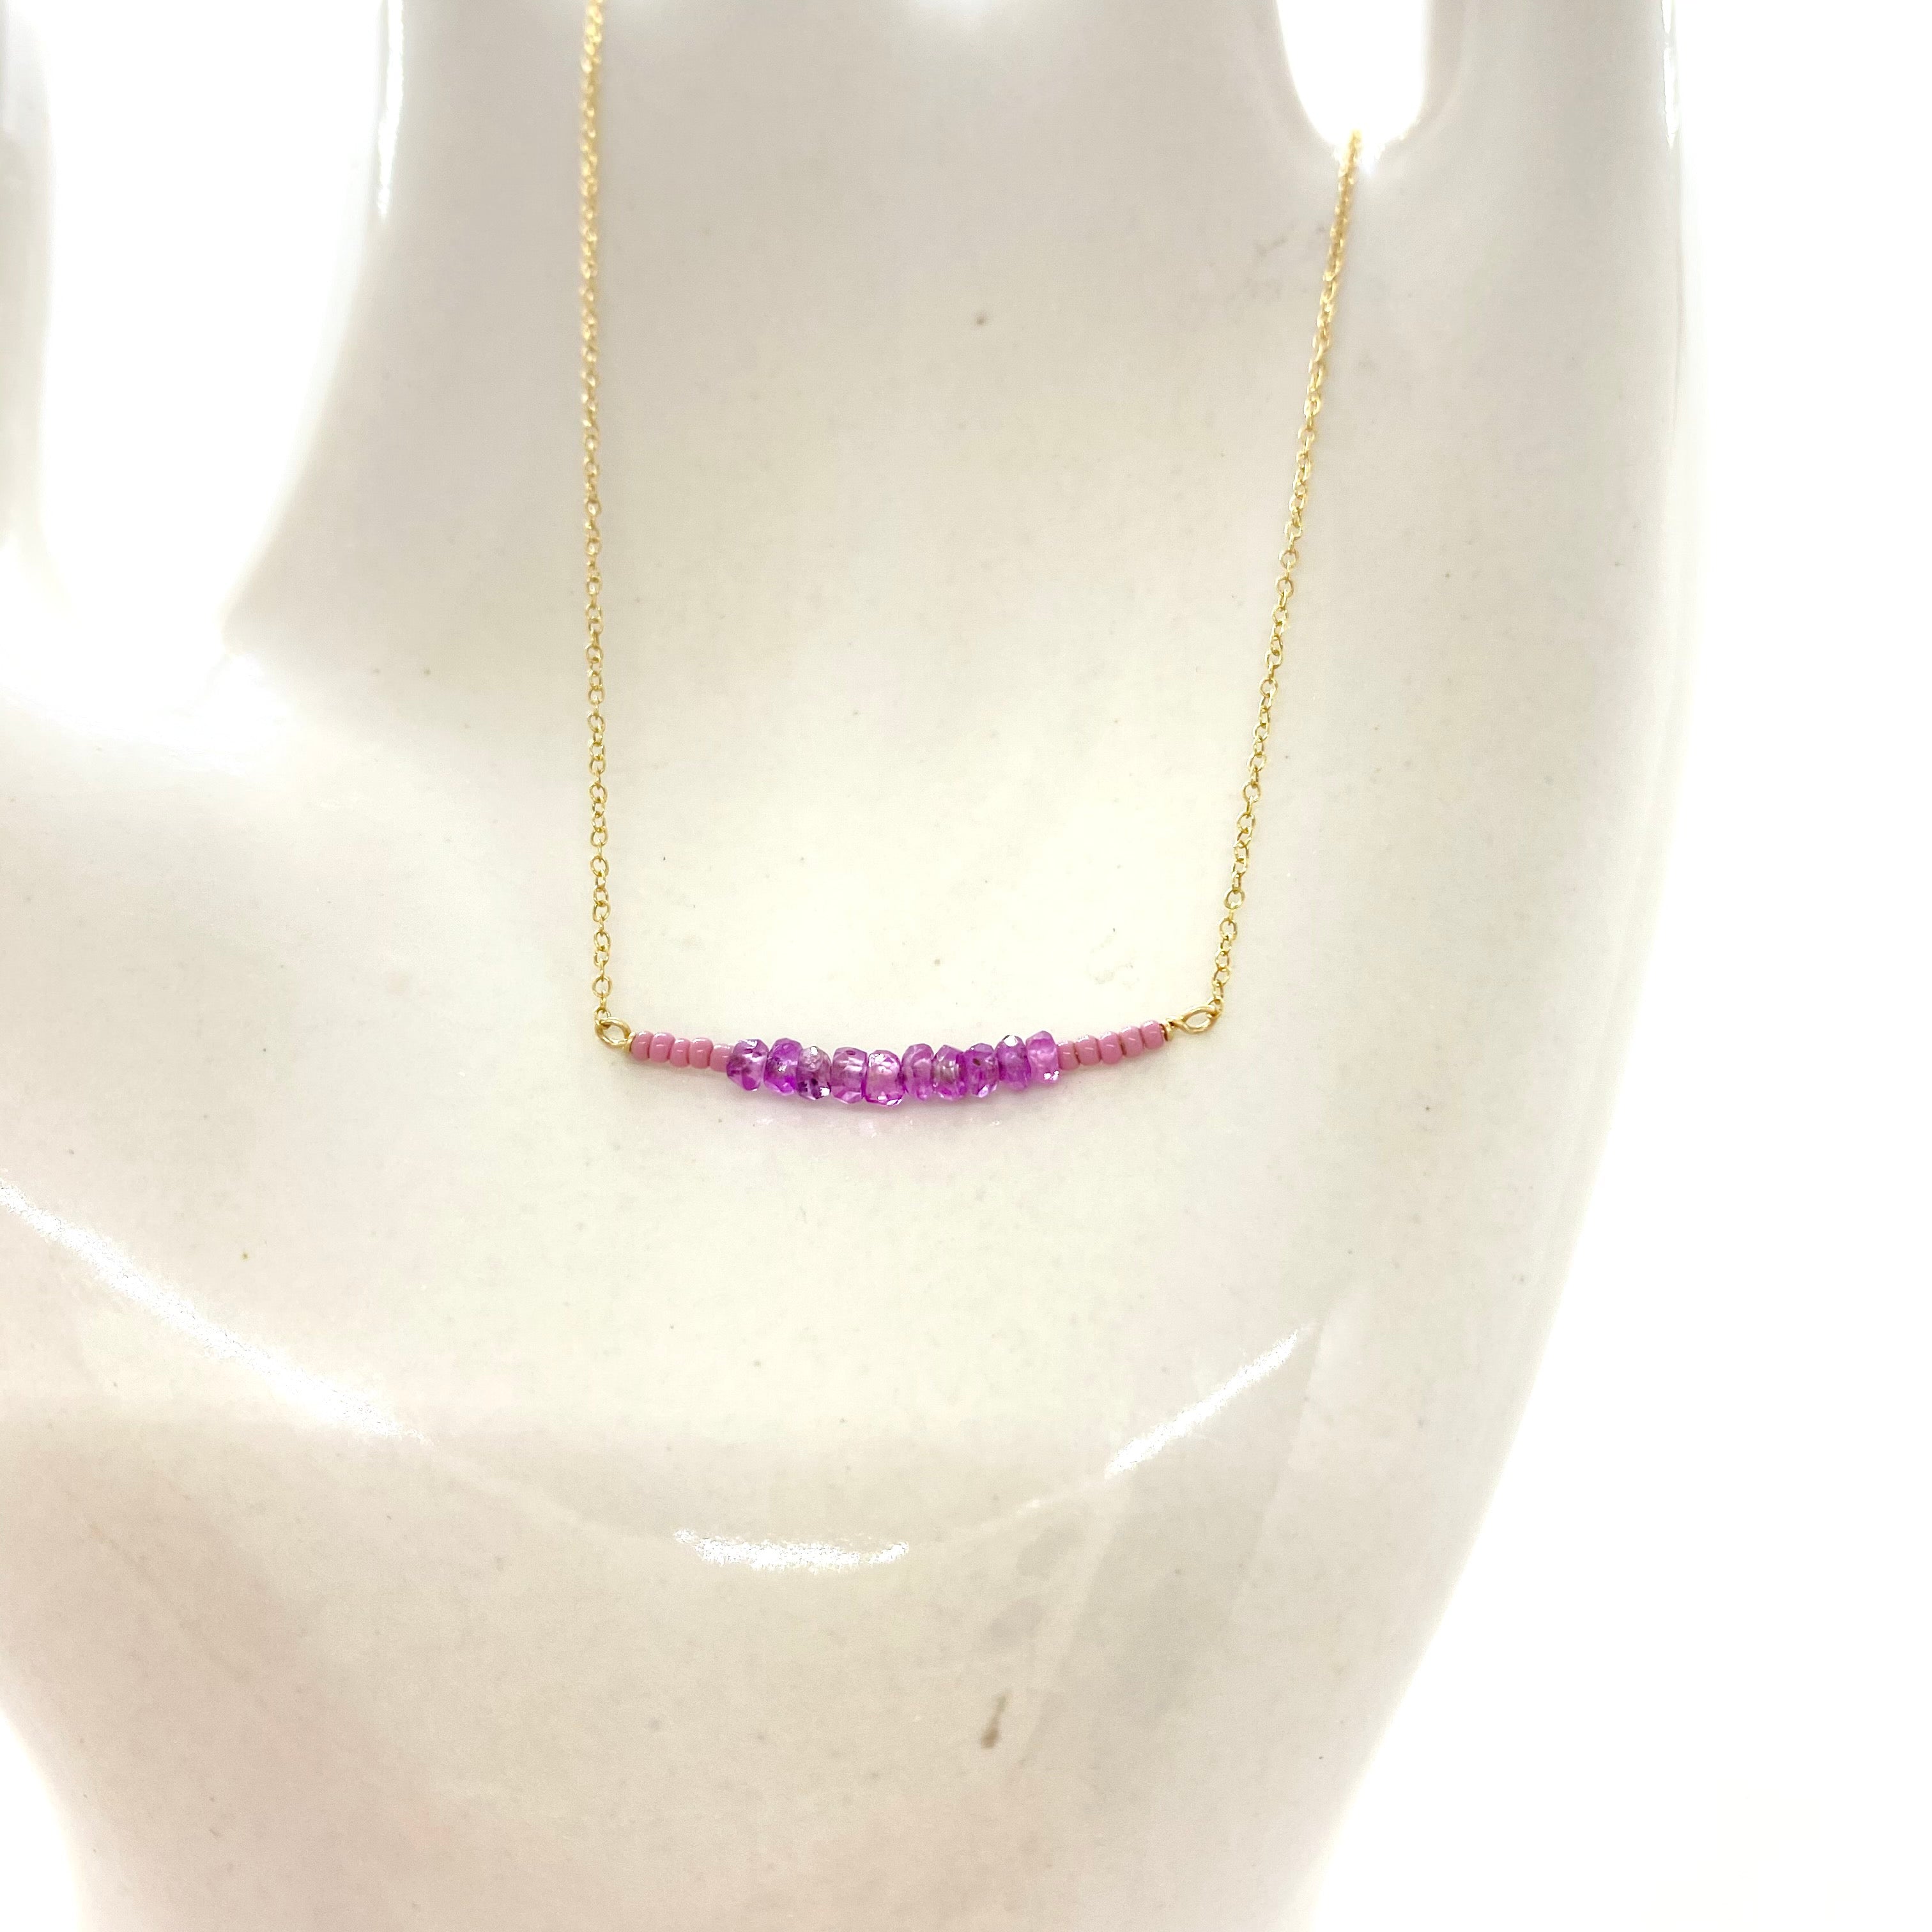 14k Gold Chain Necklace w/ Pink Sapphires & Antique Italian Beads